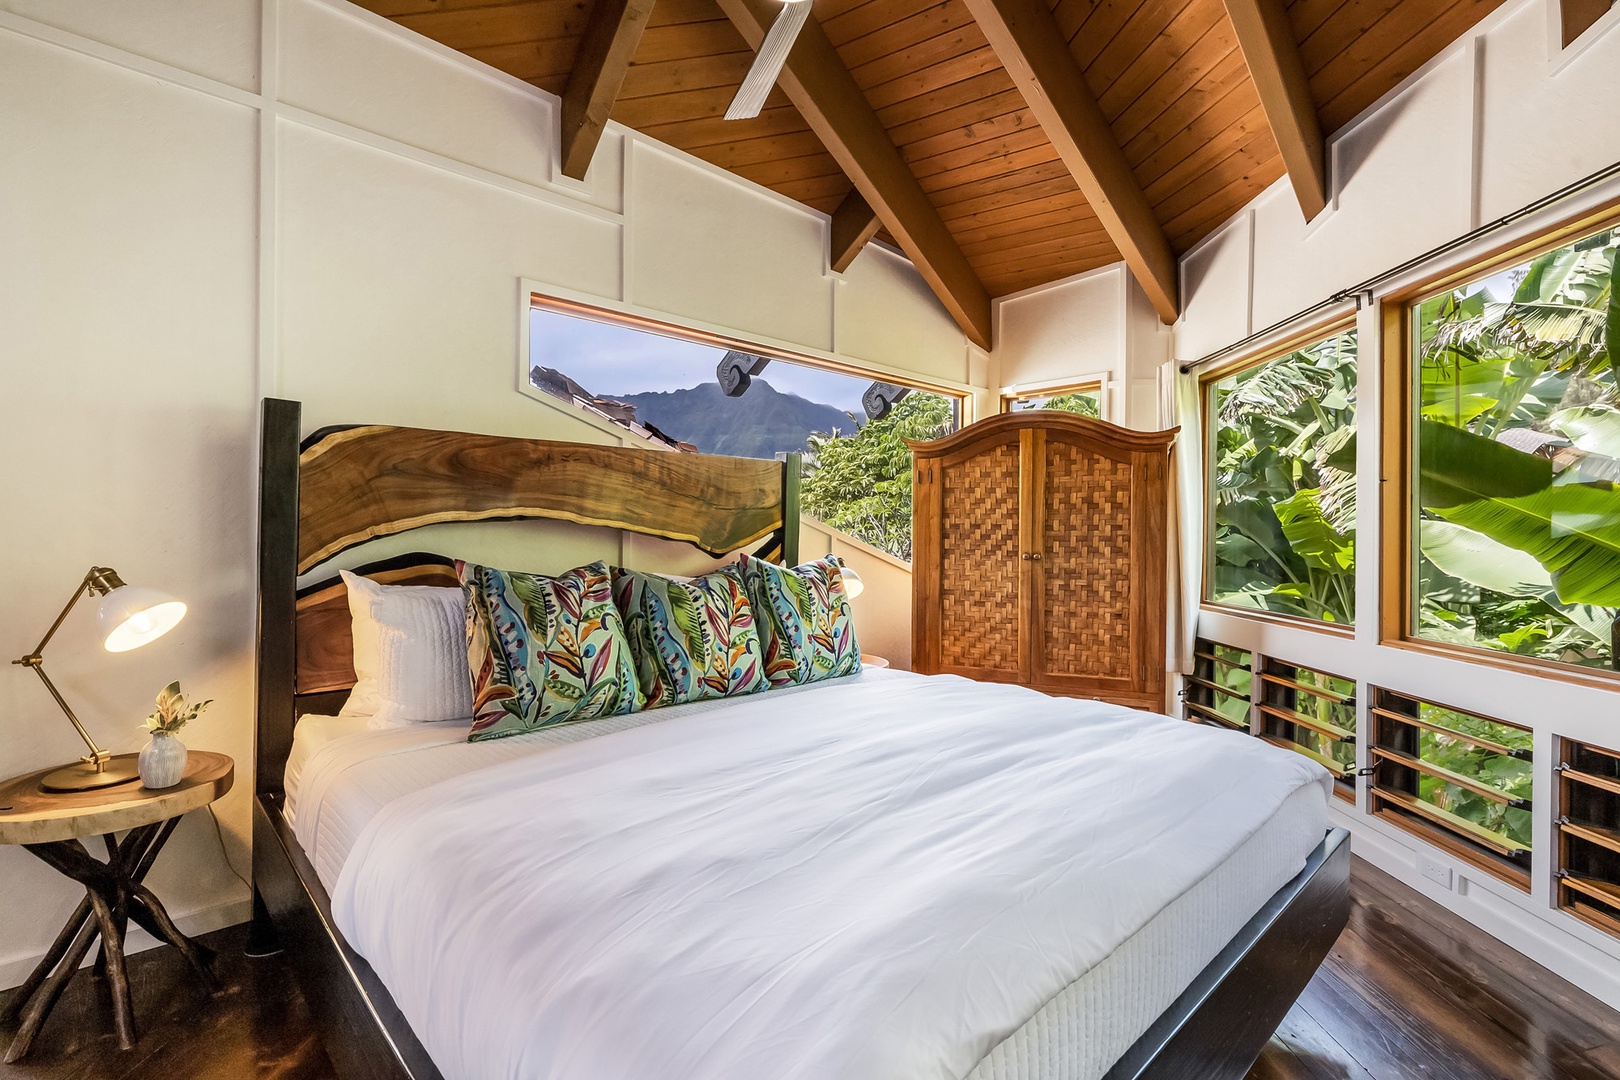 Waimanalo Vacation Rentals, Hawaii Hobbit House - Primary bedroom with king bed.